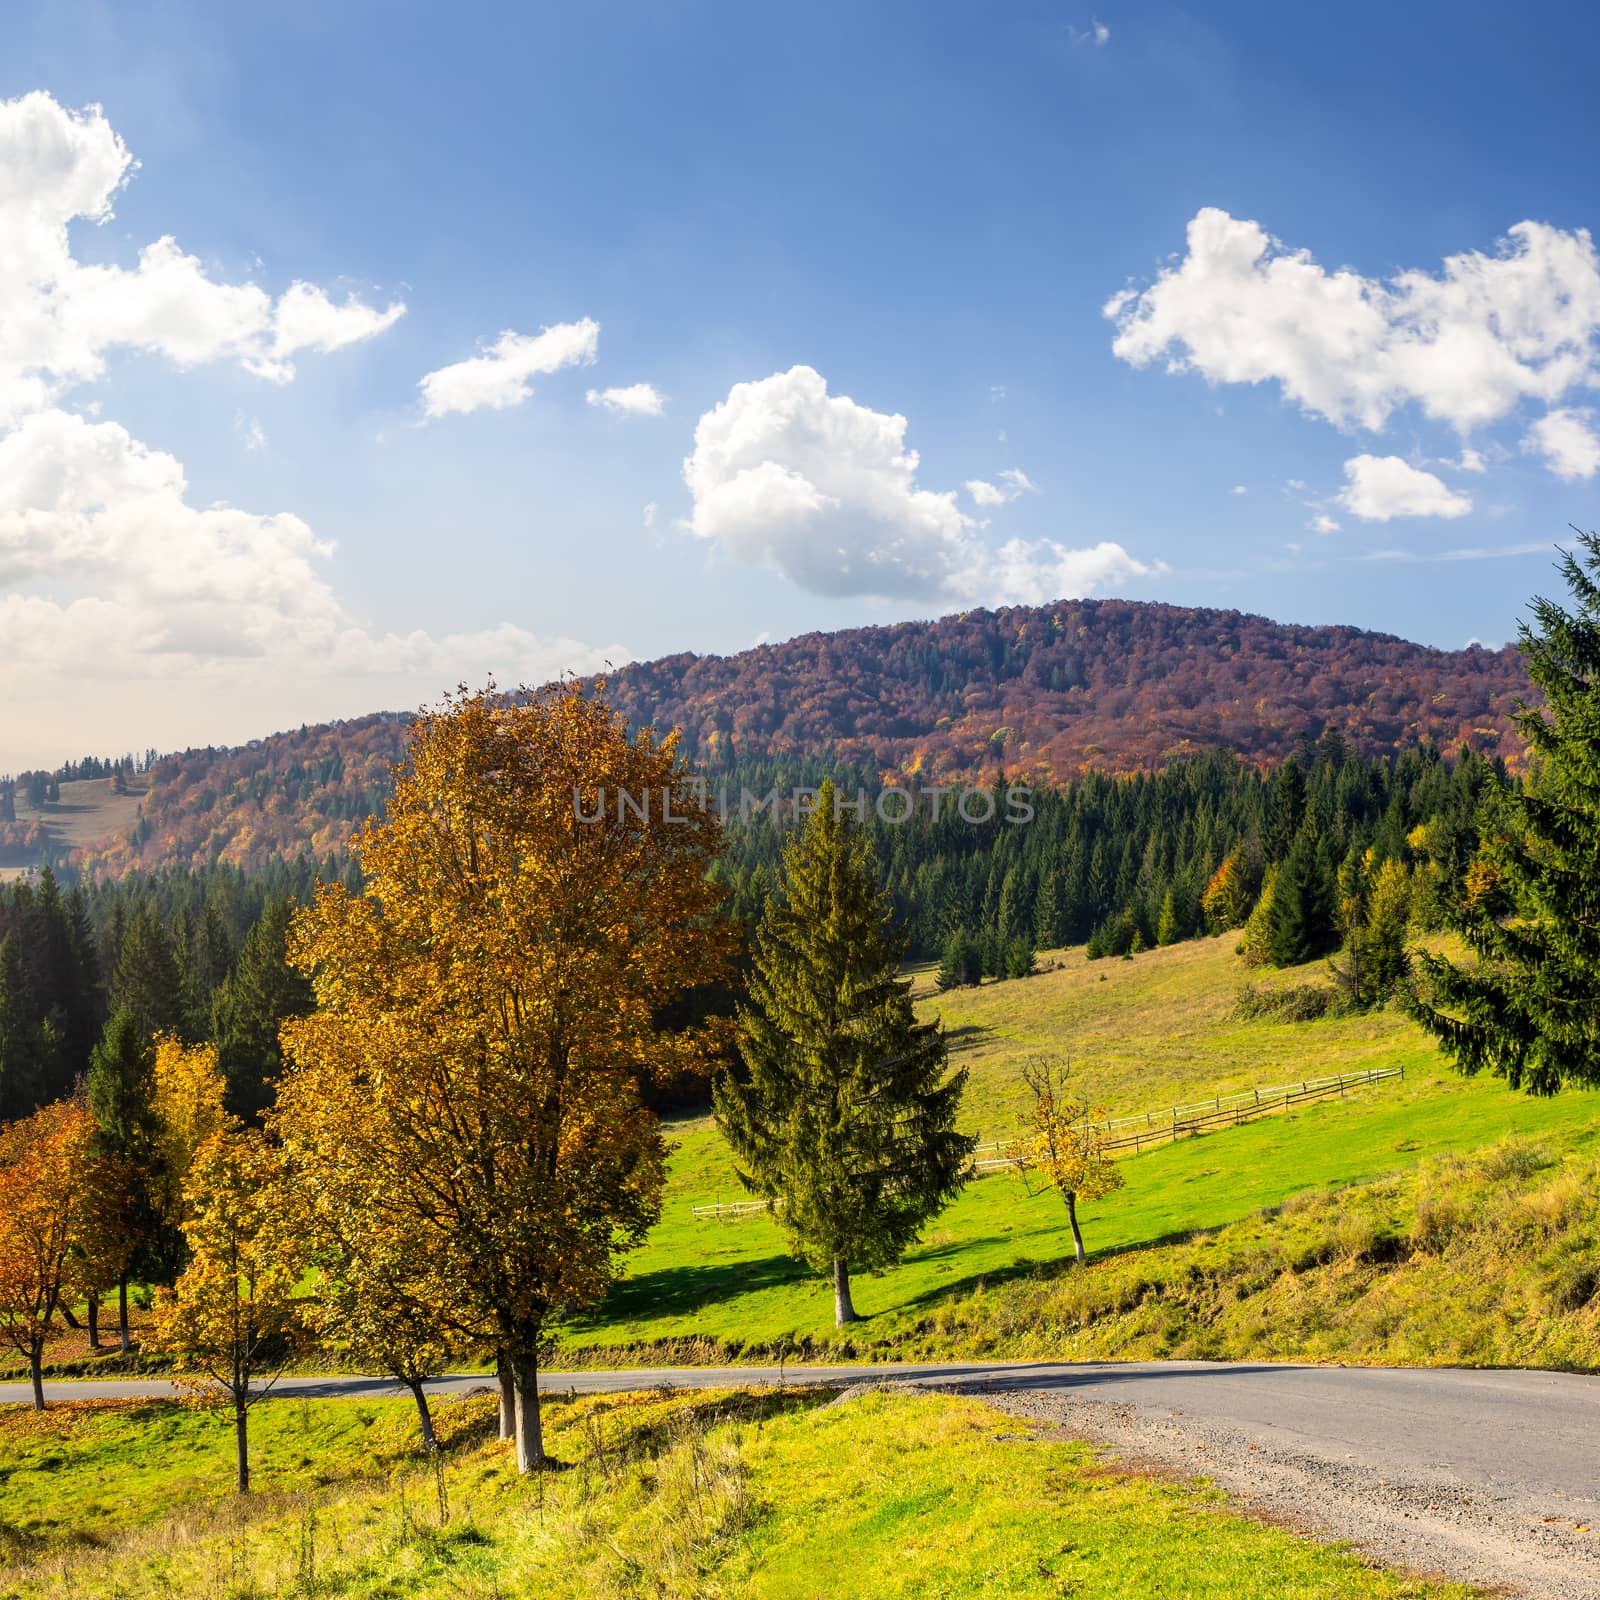 asphalt road going  passes through the autumn forest in mountain